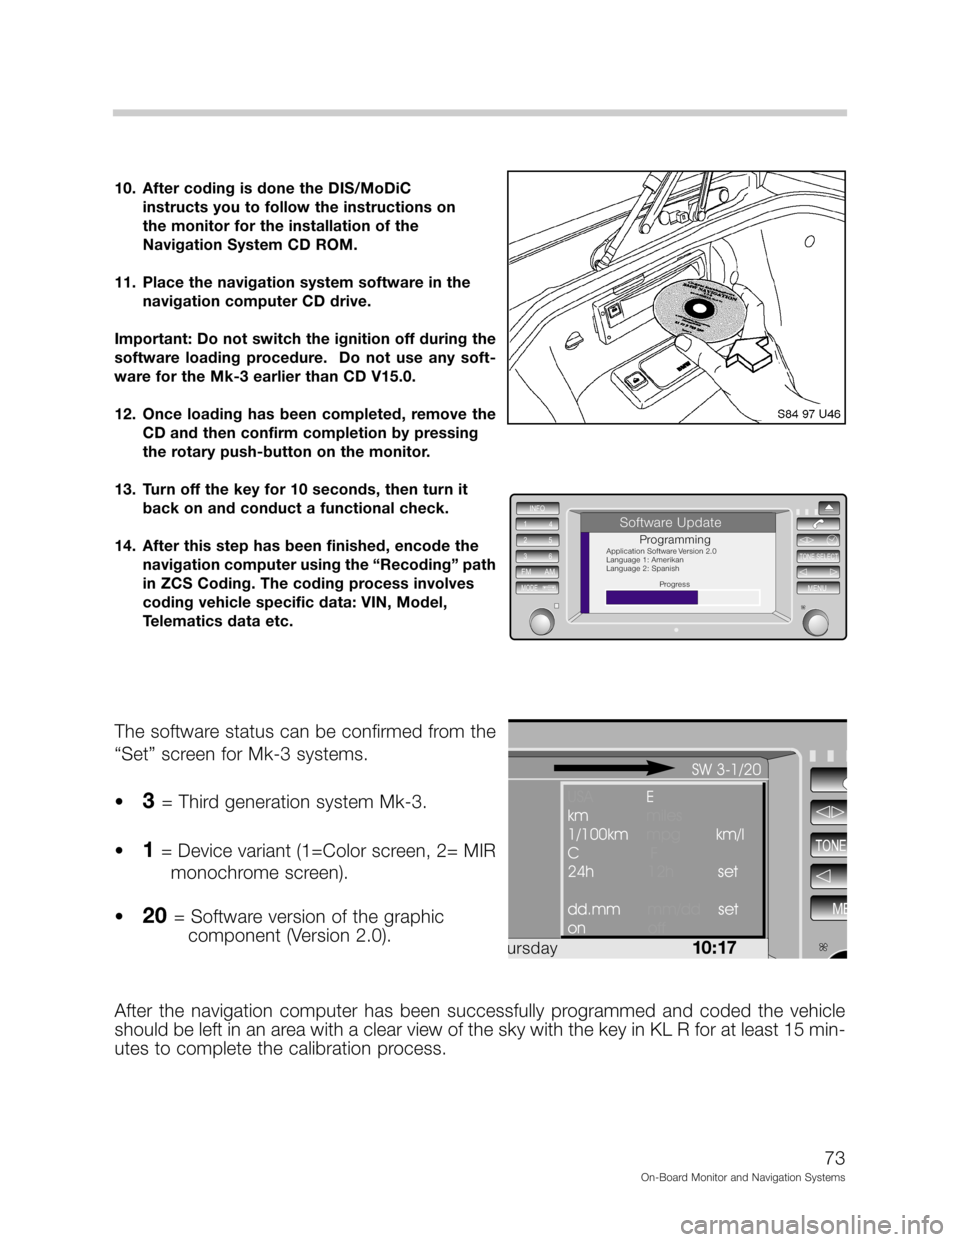 BMW 5 SERIES 1998 E39 On Board Monitor System Workshop Manual ,.



"&
(	
#%) 6 !1 !&
=	 2
 !-67& ! !!
&.! 6& !"" !6&
", 1" !-.2	)
##) 